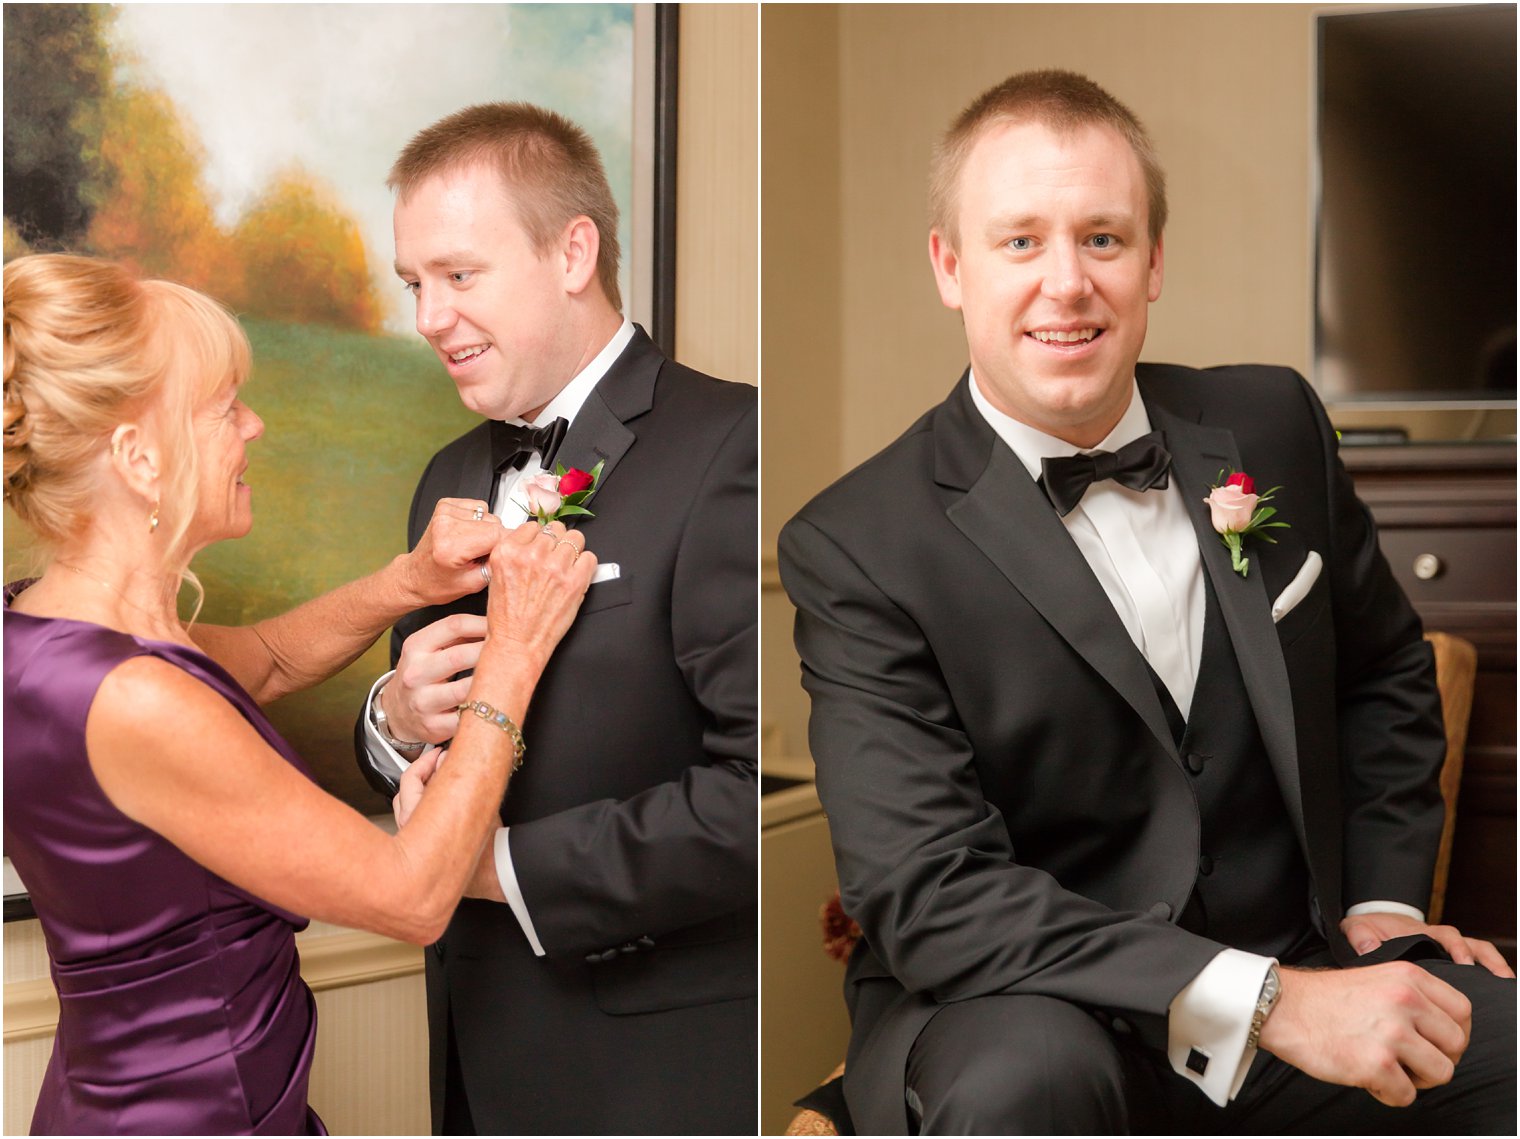 Groom's mother putting on his boutonniere